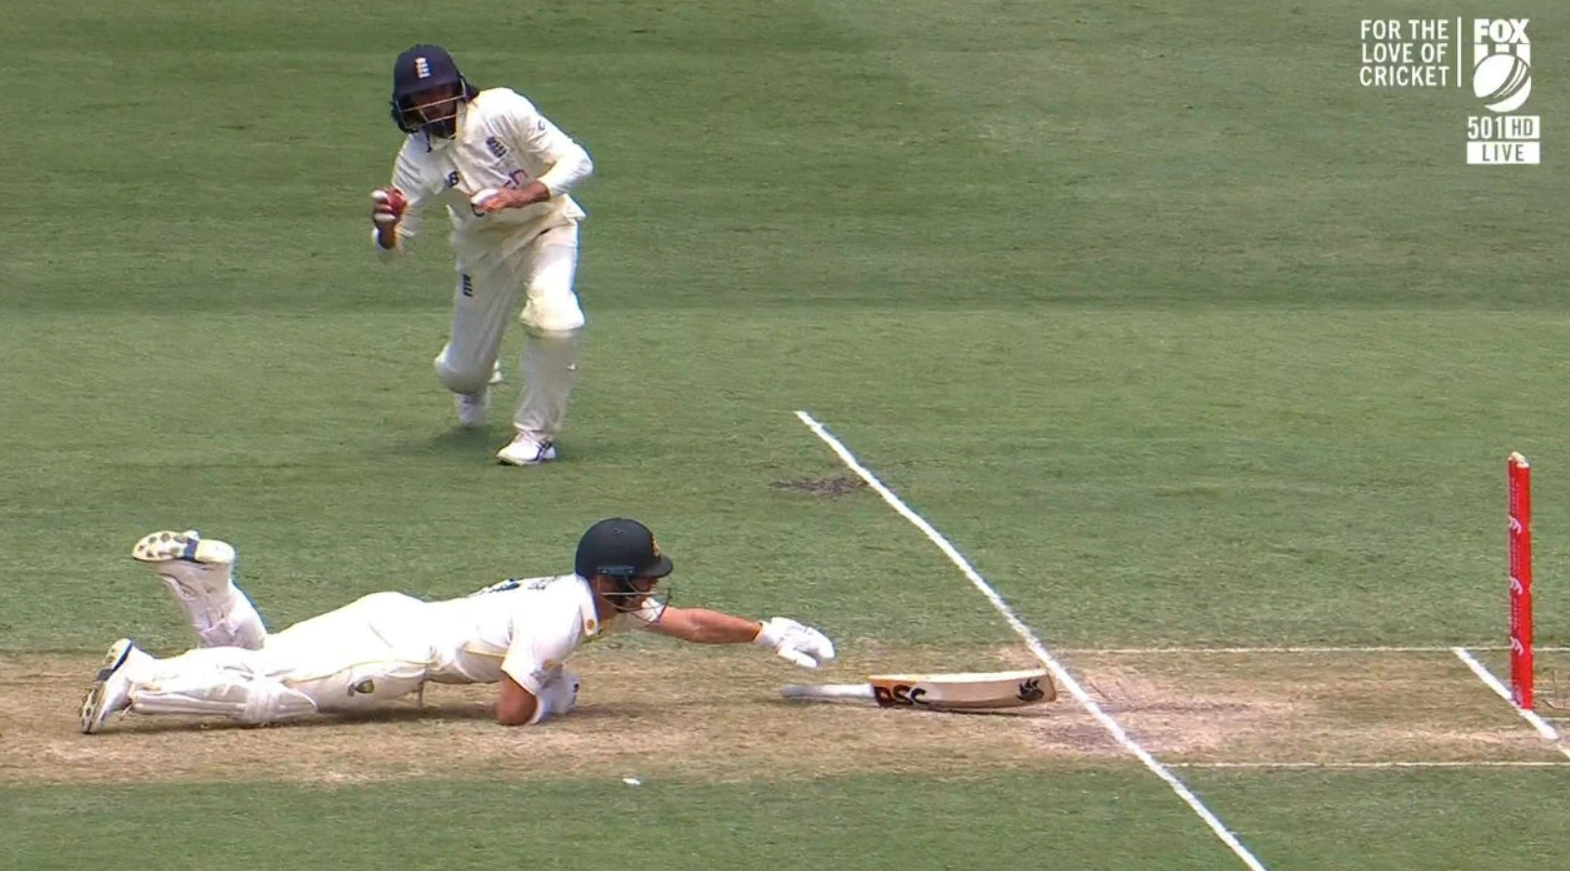 Ashes 2020-21: Watch: David Warner Narrowly Escapes A Run Out On Day 2 Of The Gabba Test